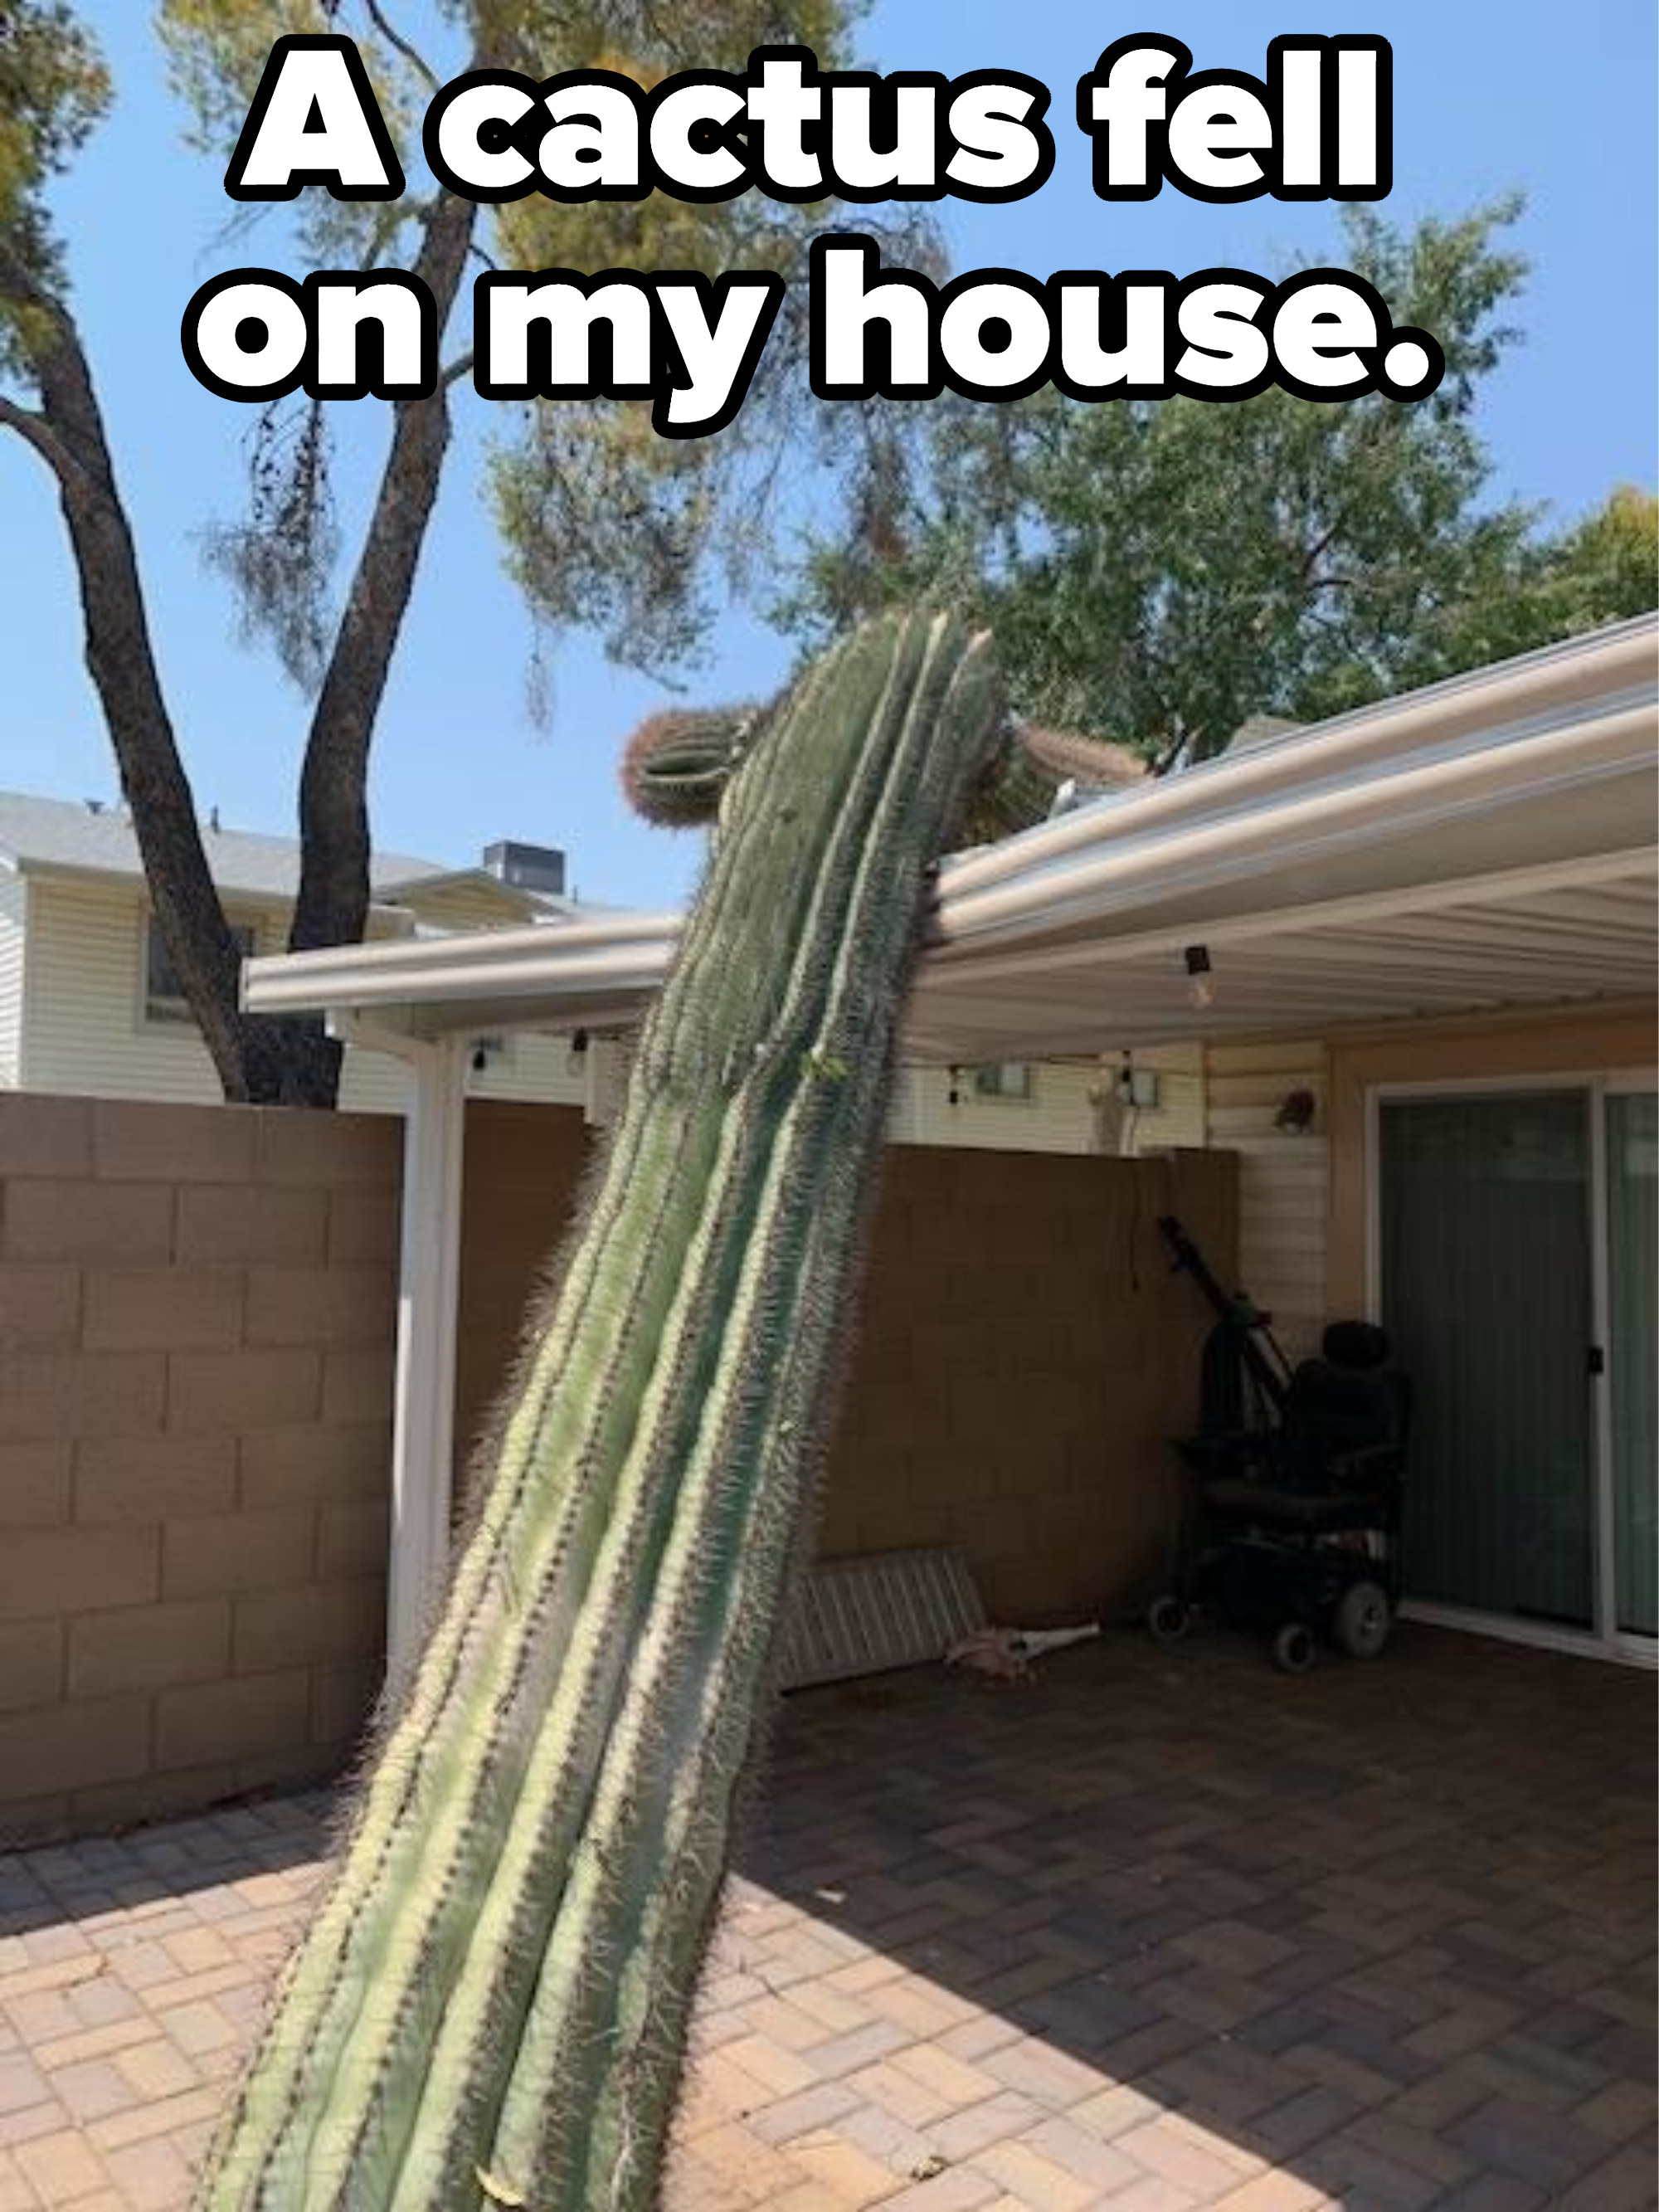 A giant cactus toppling over onto a house